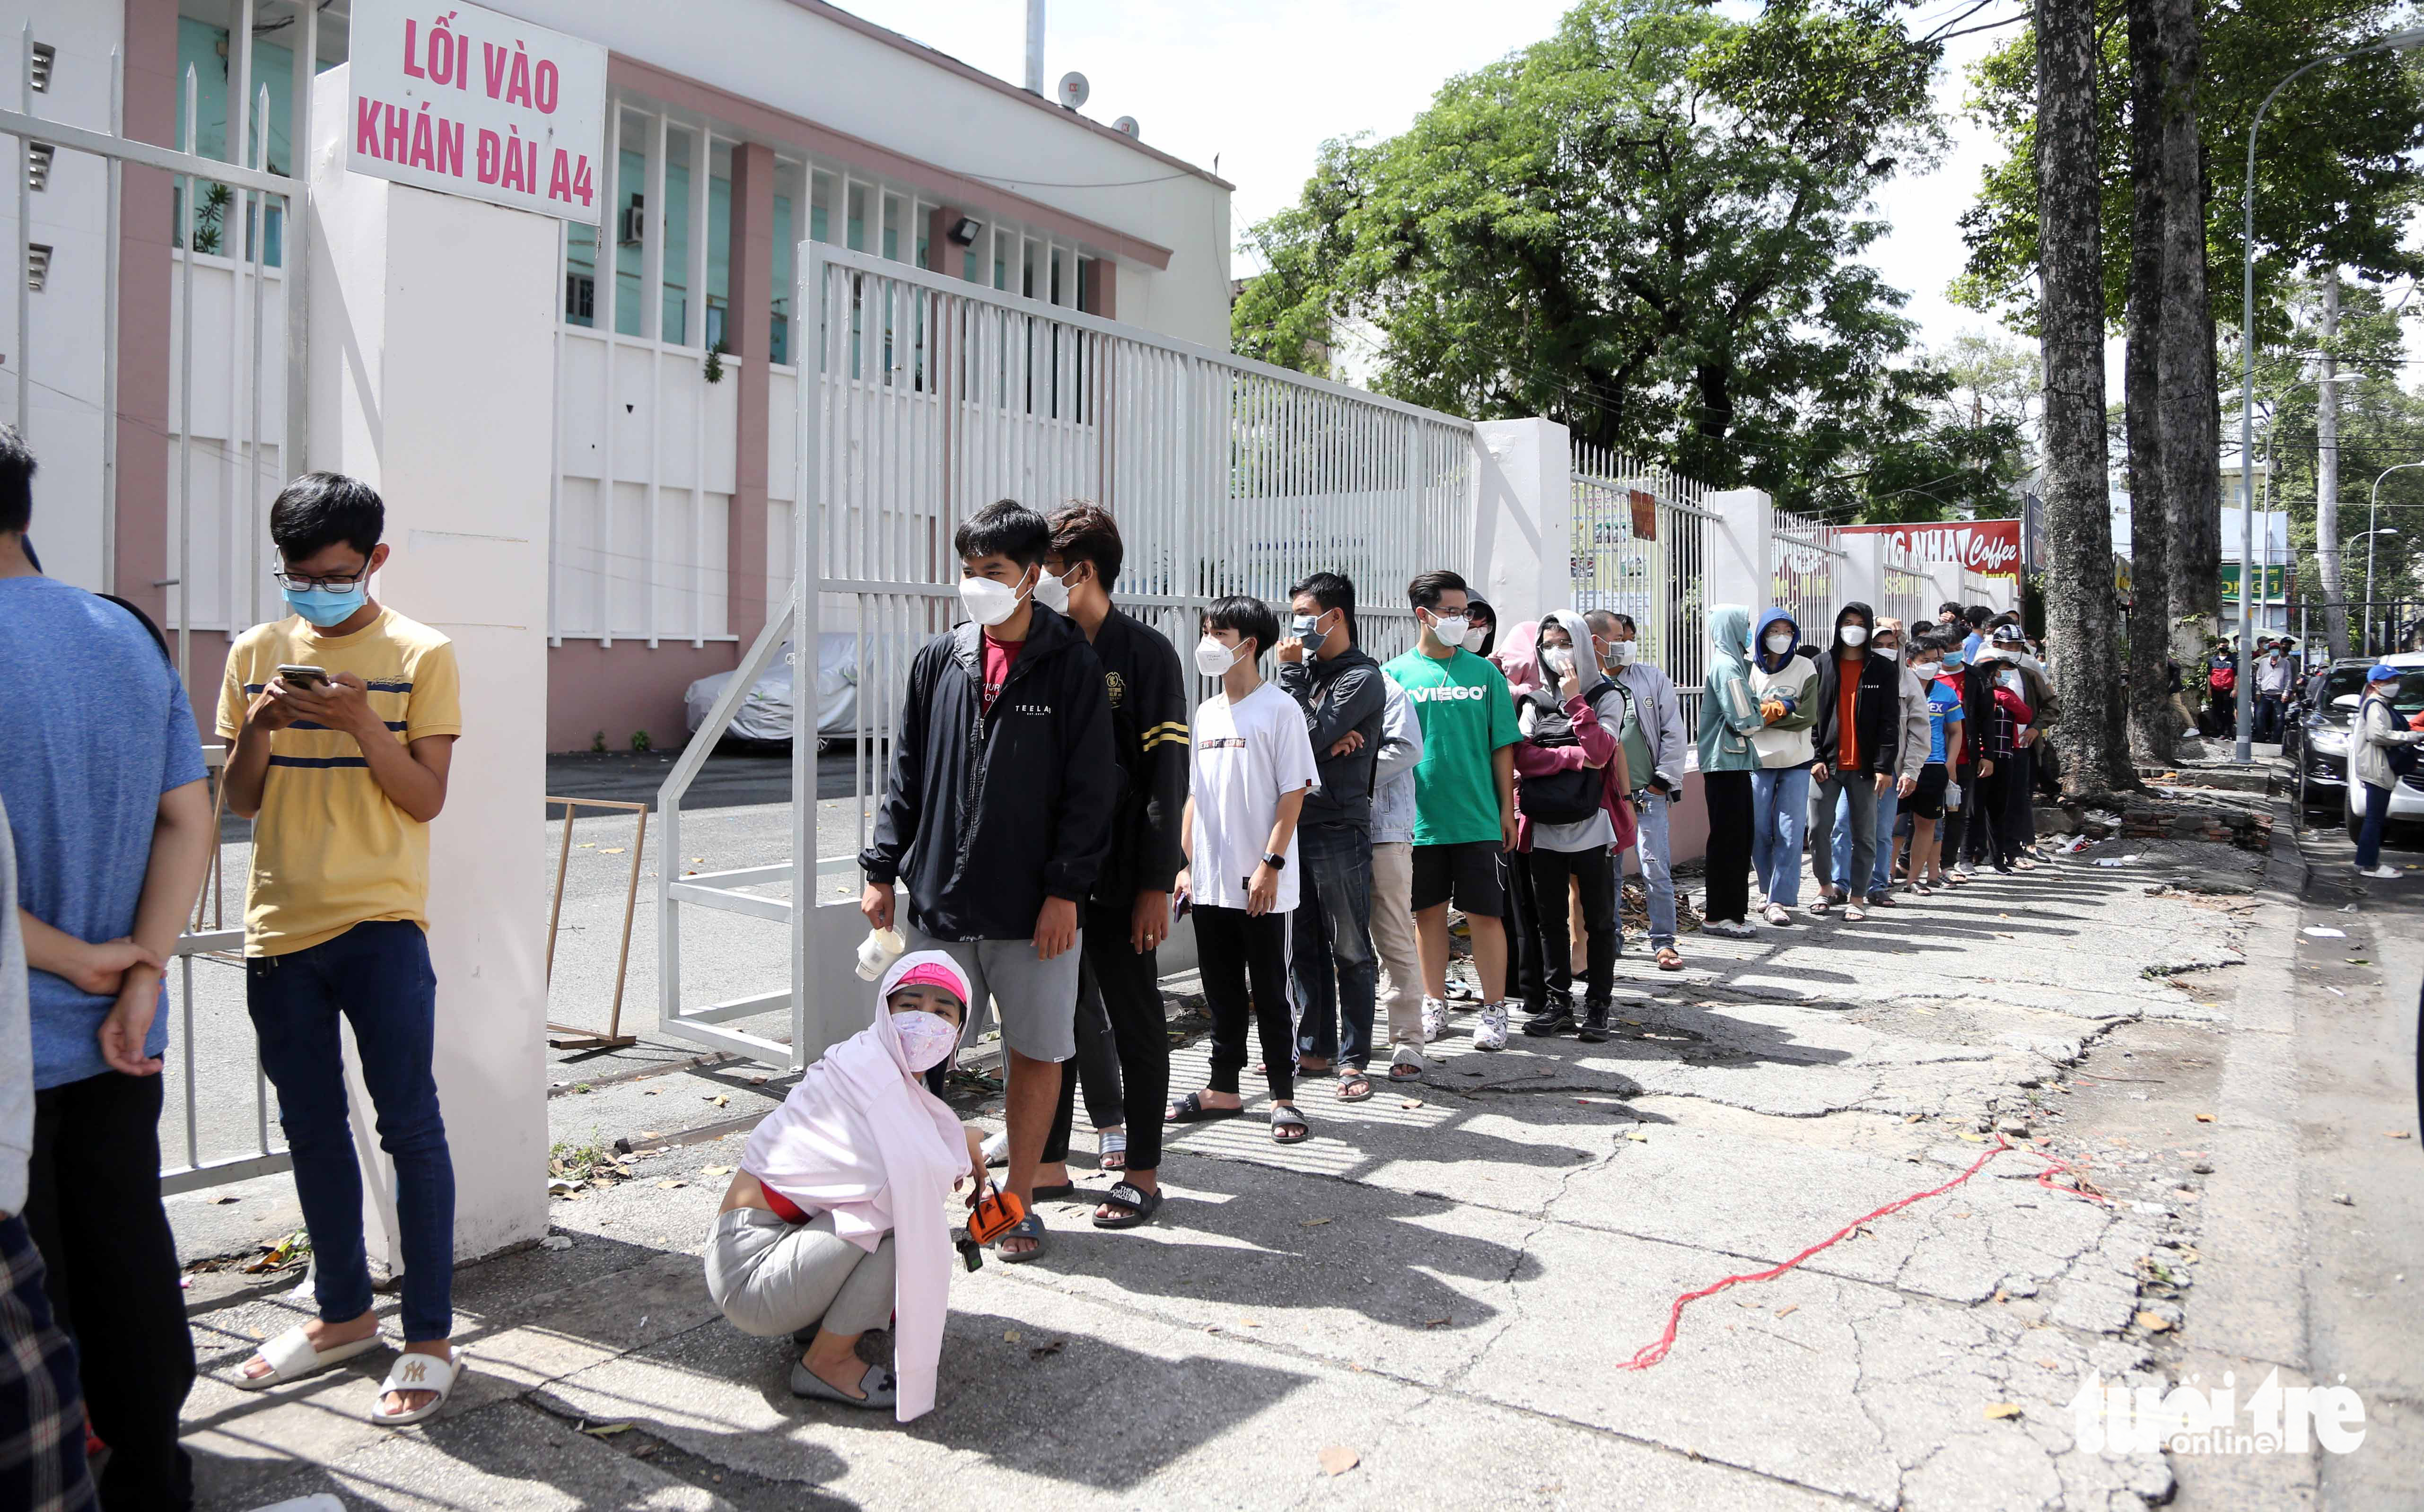 A long line of people wait to buy tickets for the Vietnam - Afghanistan friendly at Thong Nhat Stadium in District 10, Ho Chi Minh City, May 29, 2022. Photo: N.K. / Tuoi Tr